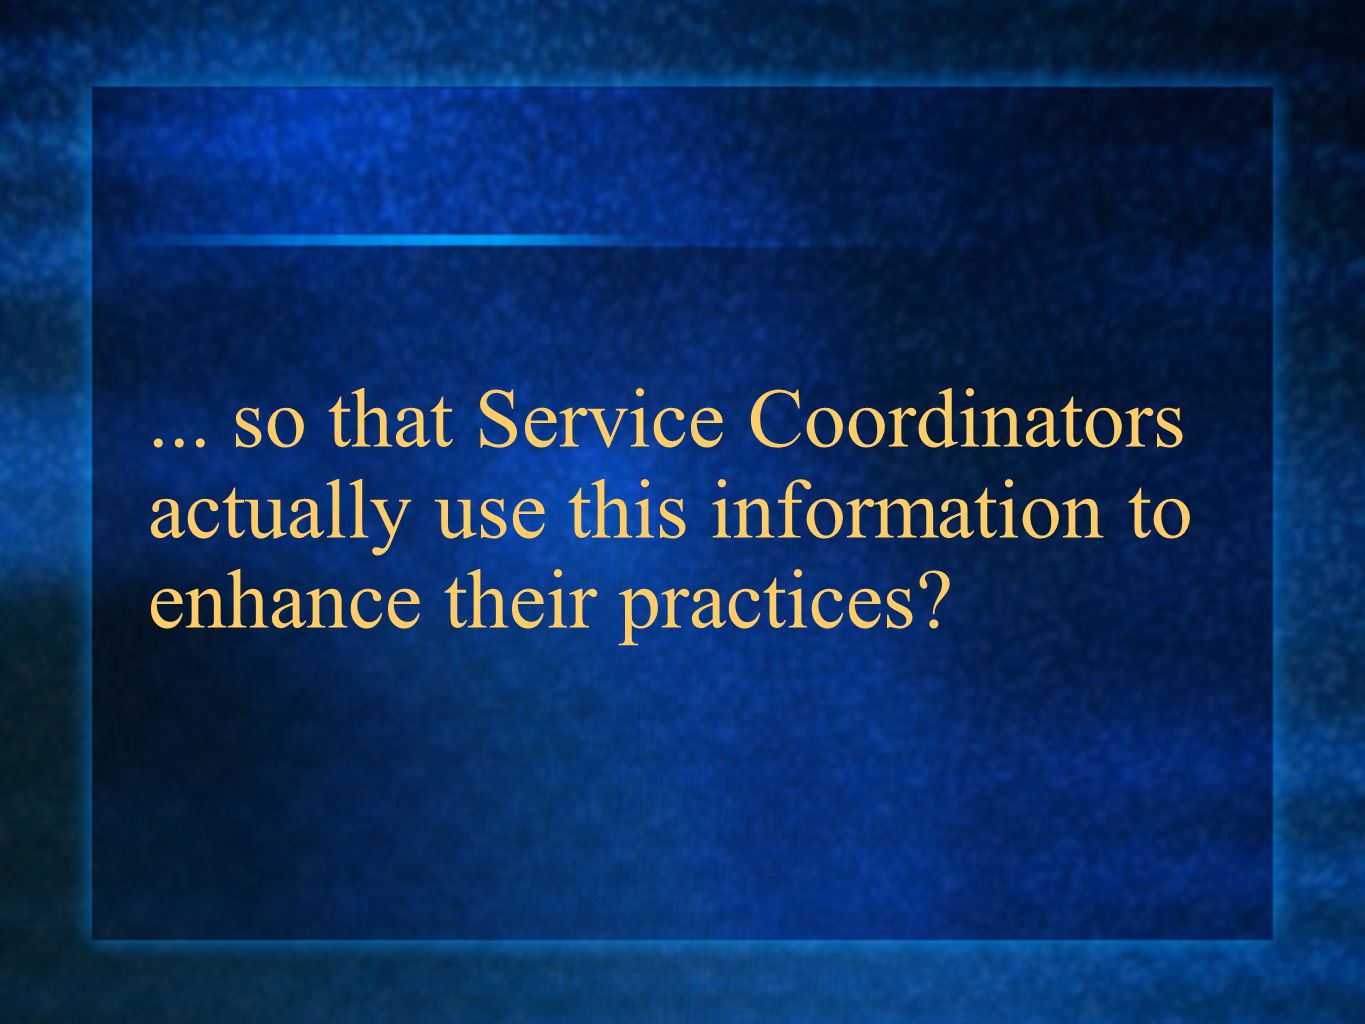 ... so that Service Coordinators actually use this information to enhance their practices